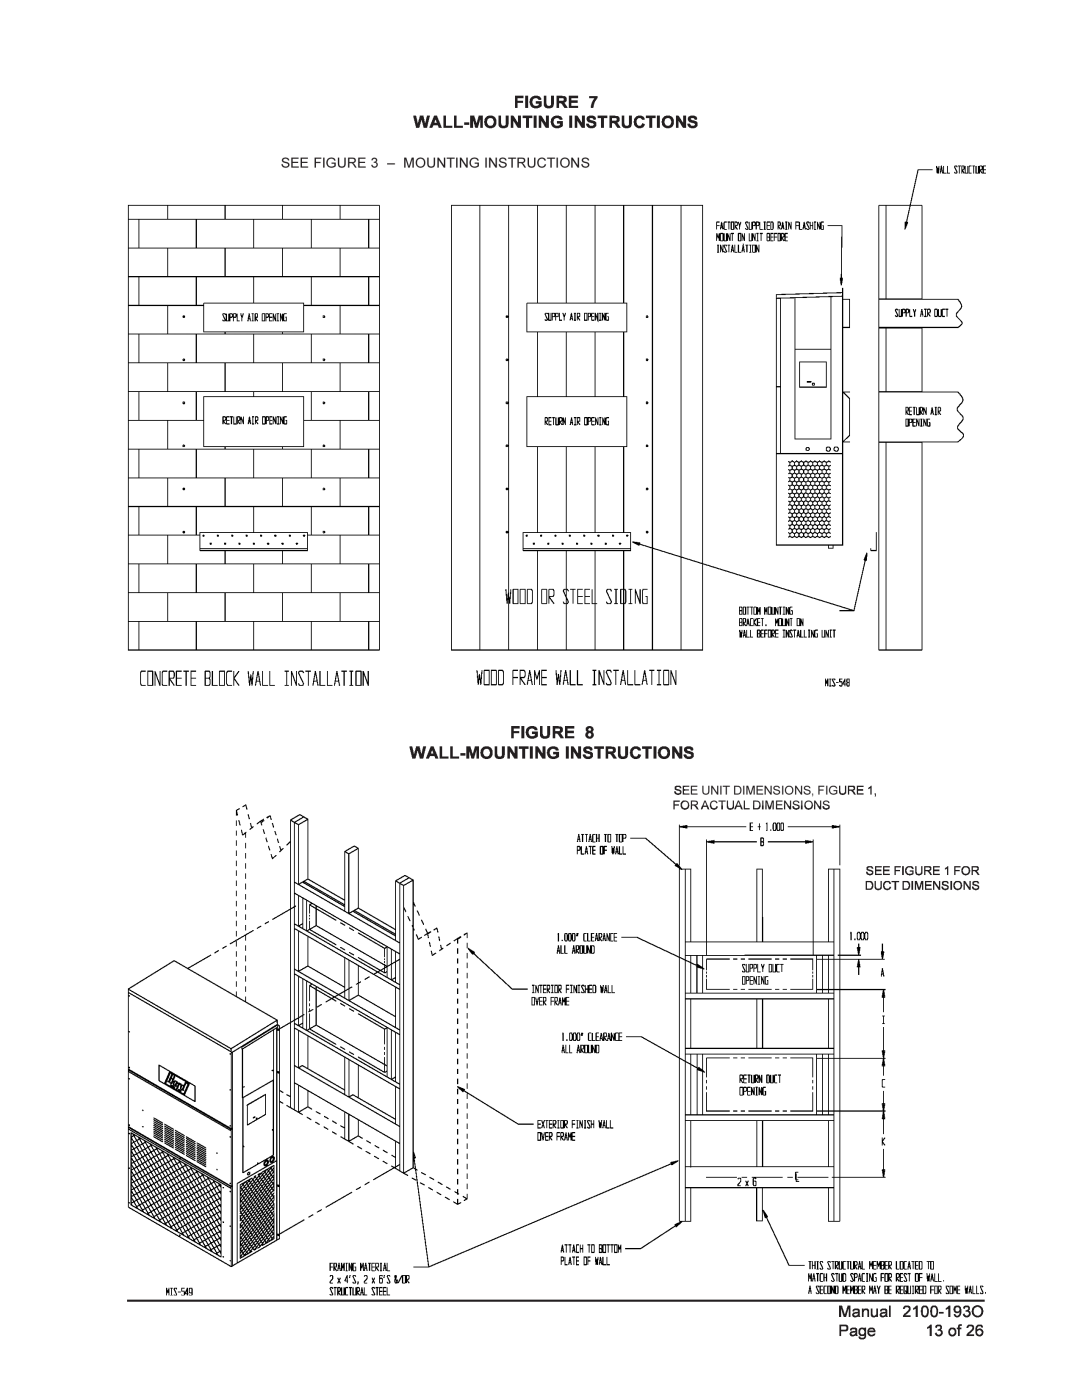 Bard WH361 Figure Wall-Mountinginstructions, Manual, Page, 13 of, See Unit Dimensions, Figure For Actual Dimensions 